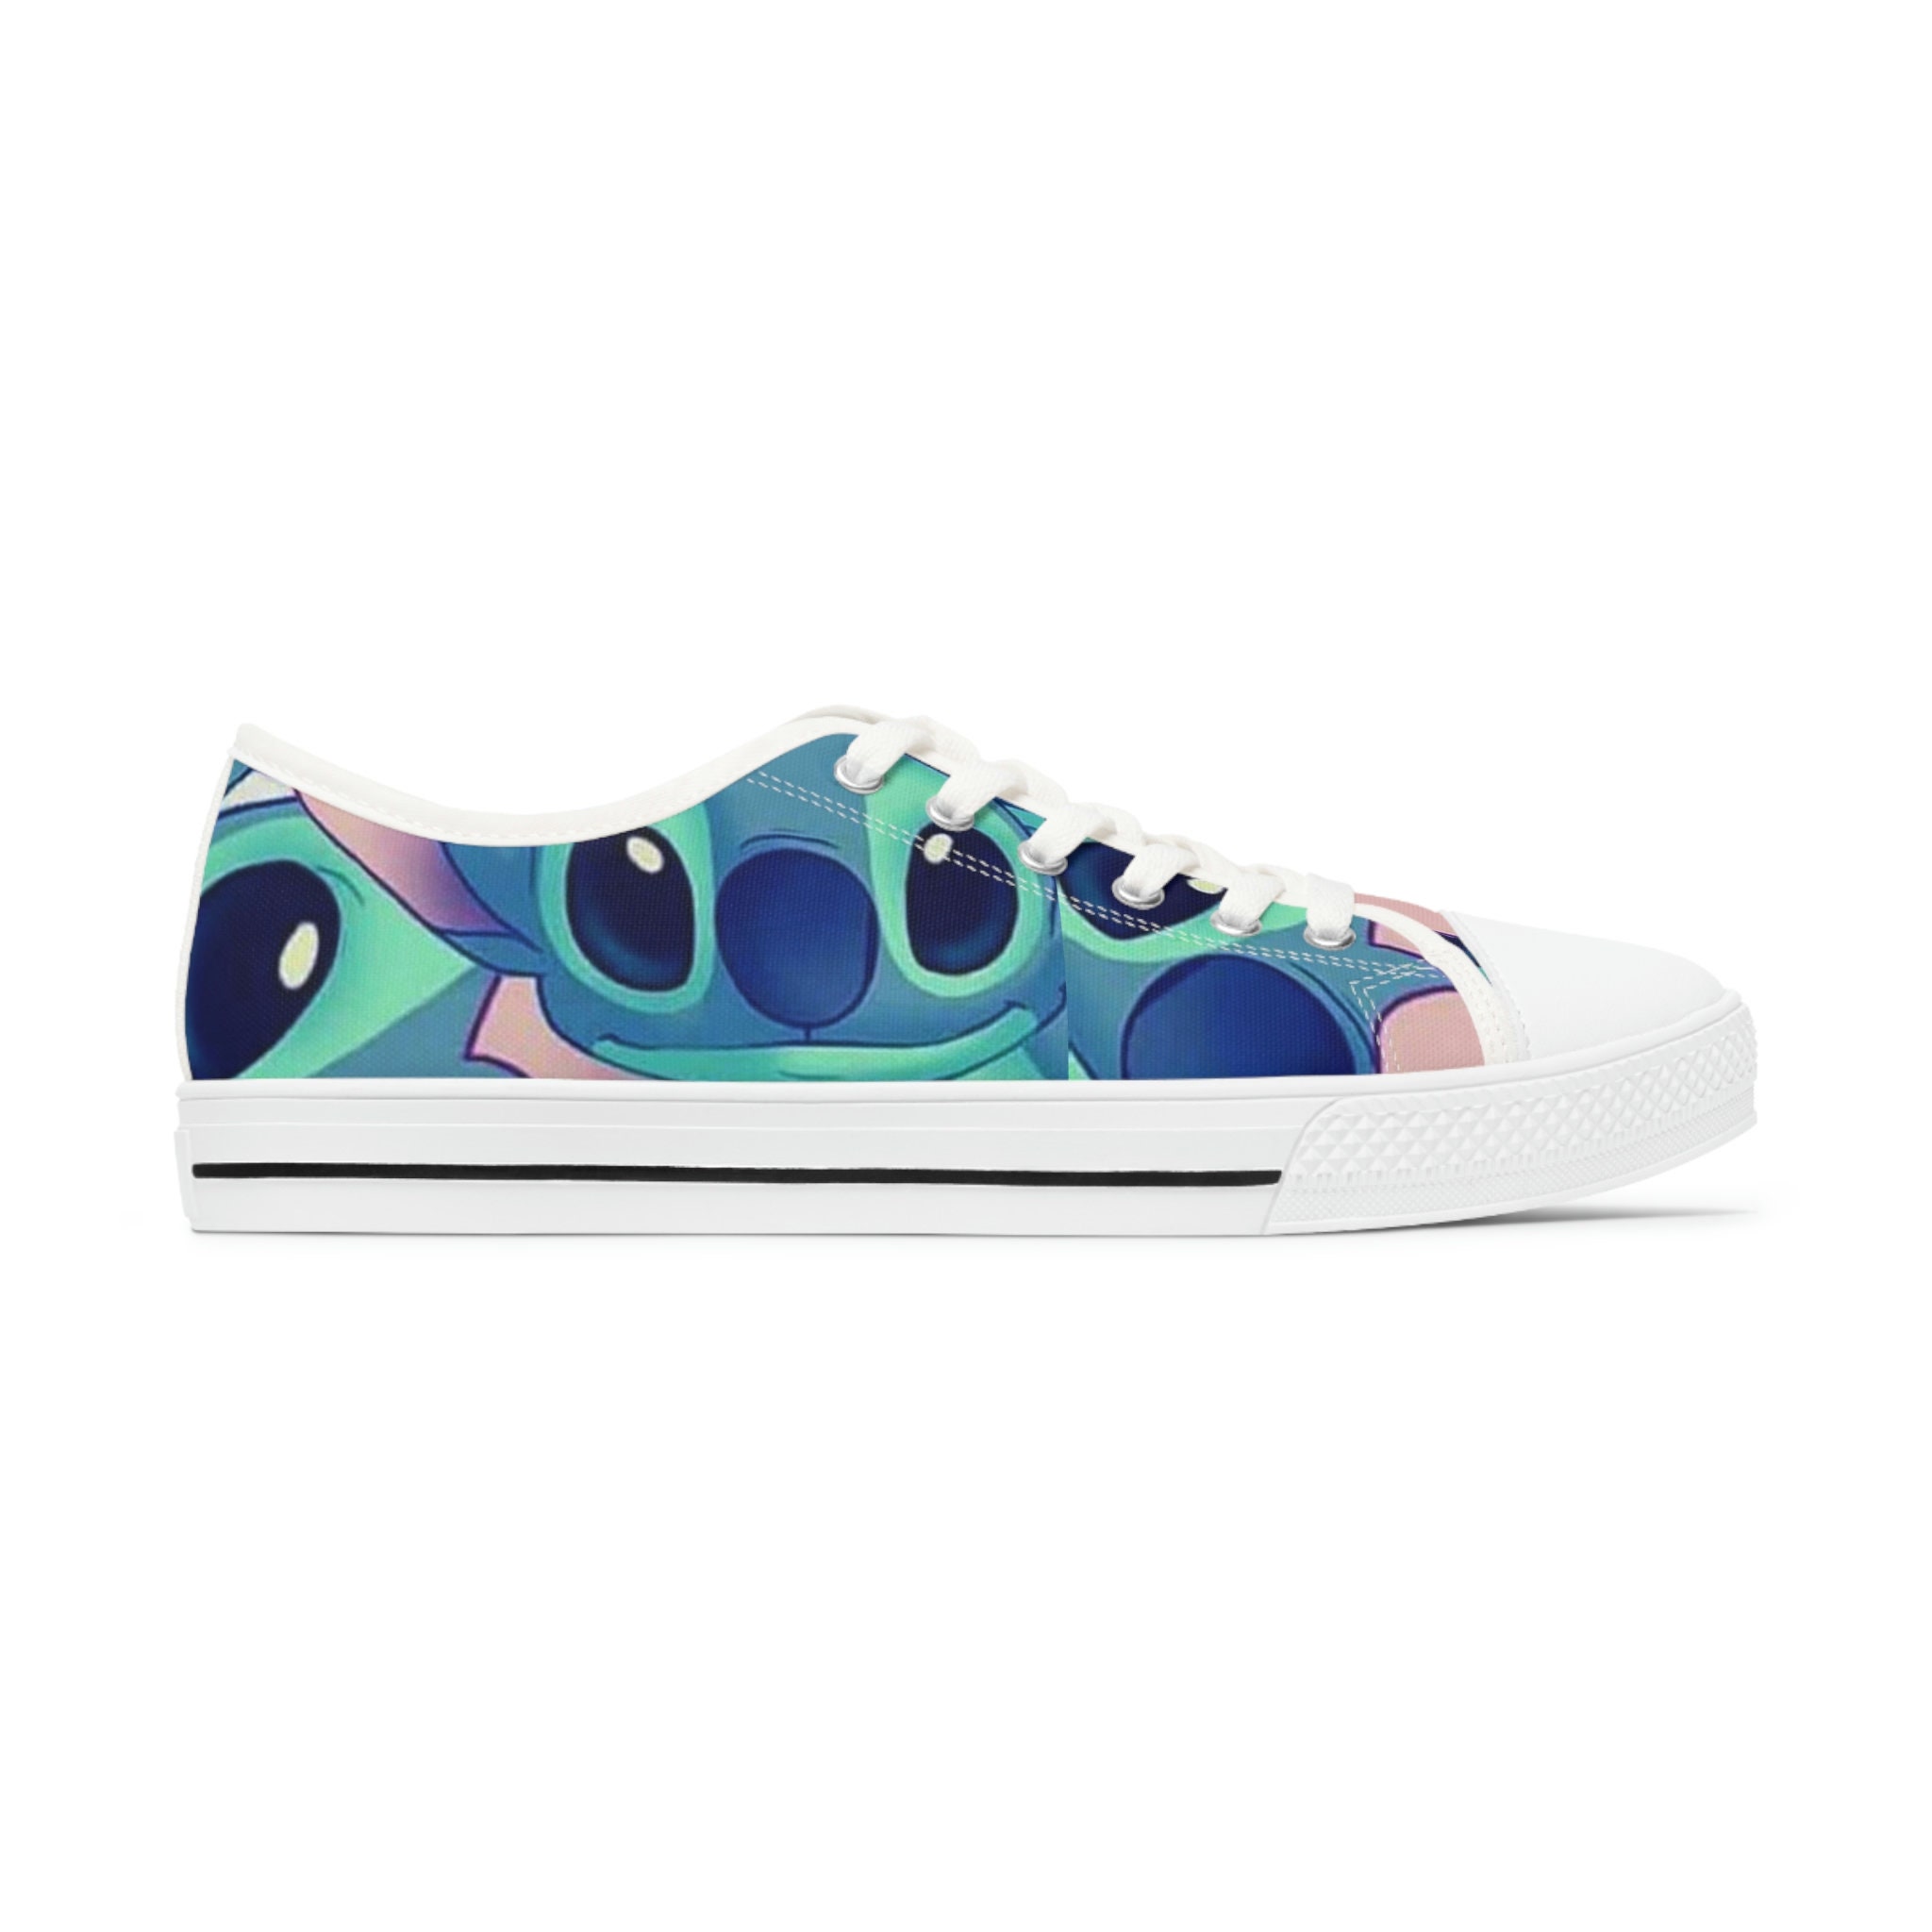 Stitch lilo and Stitch Shoes Women's Low Top Sneakers sold by Switching ...